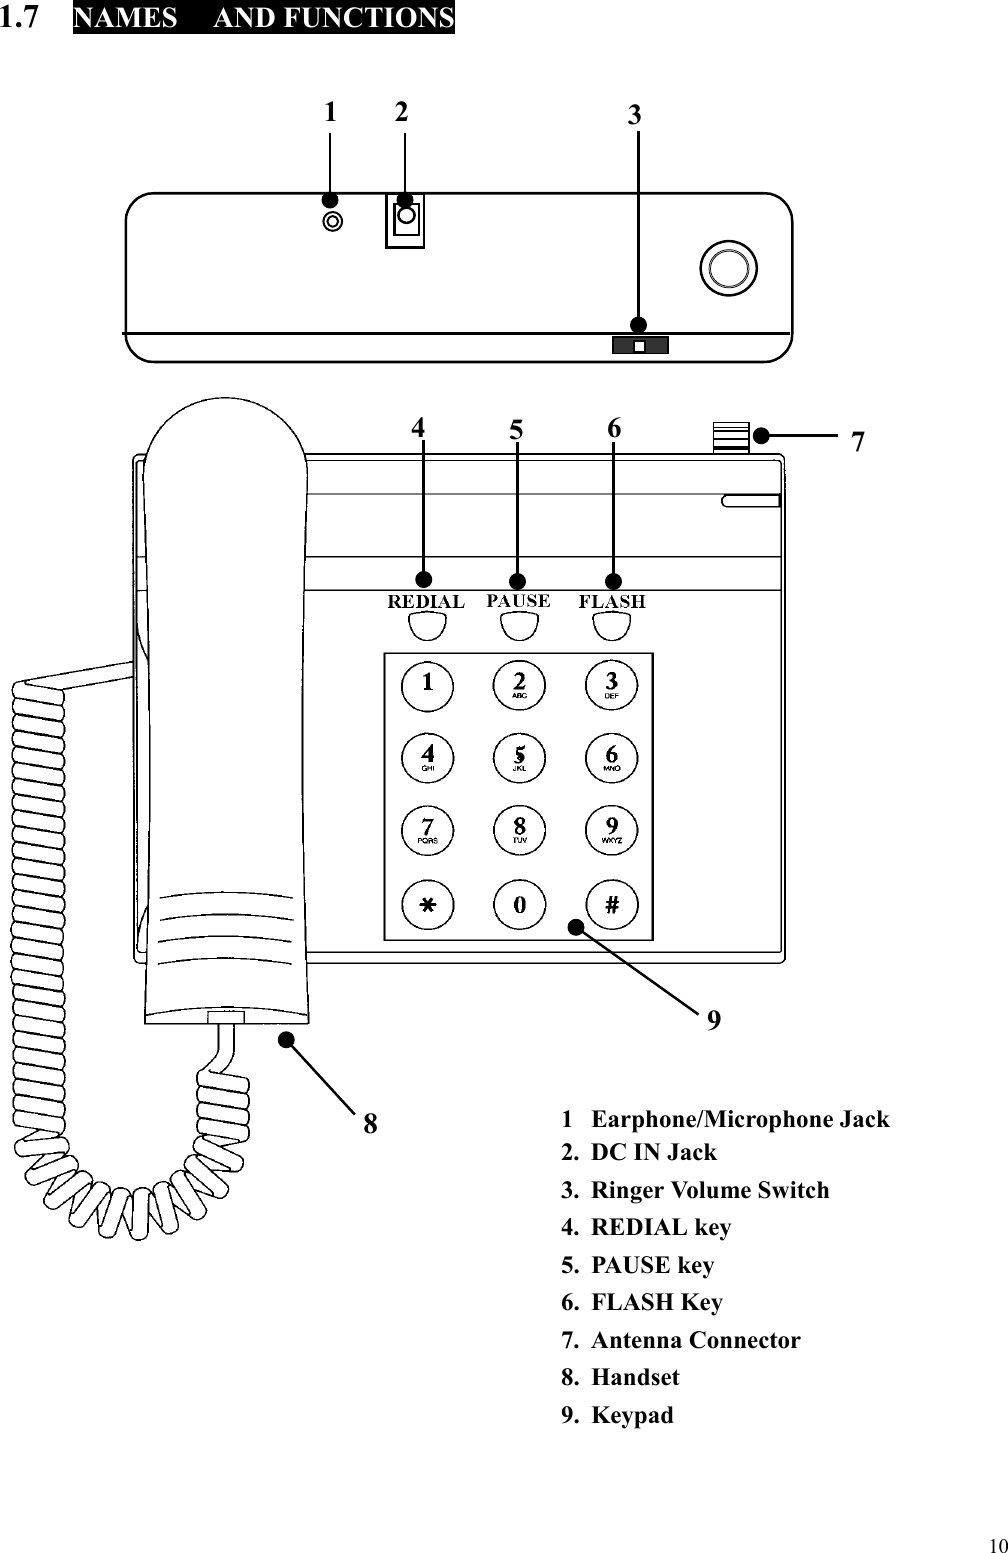  10 1.7  NAMES  AND FUNCTIONS                                                             1 Earphone/Microphone Jack 2.  DC IN Jack 3.  Ringer Volume Switch 4. REDIAL key 5. PAUSE key 6. FLASH Key 7. Antenna Connector 8. Handset 9. Keypad 1  2  3 4  5  6  7 8 9 